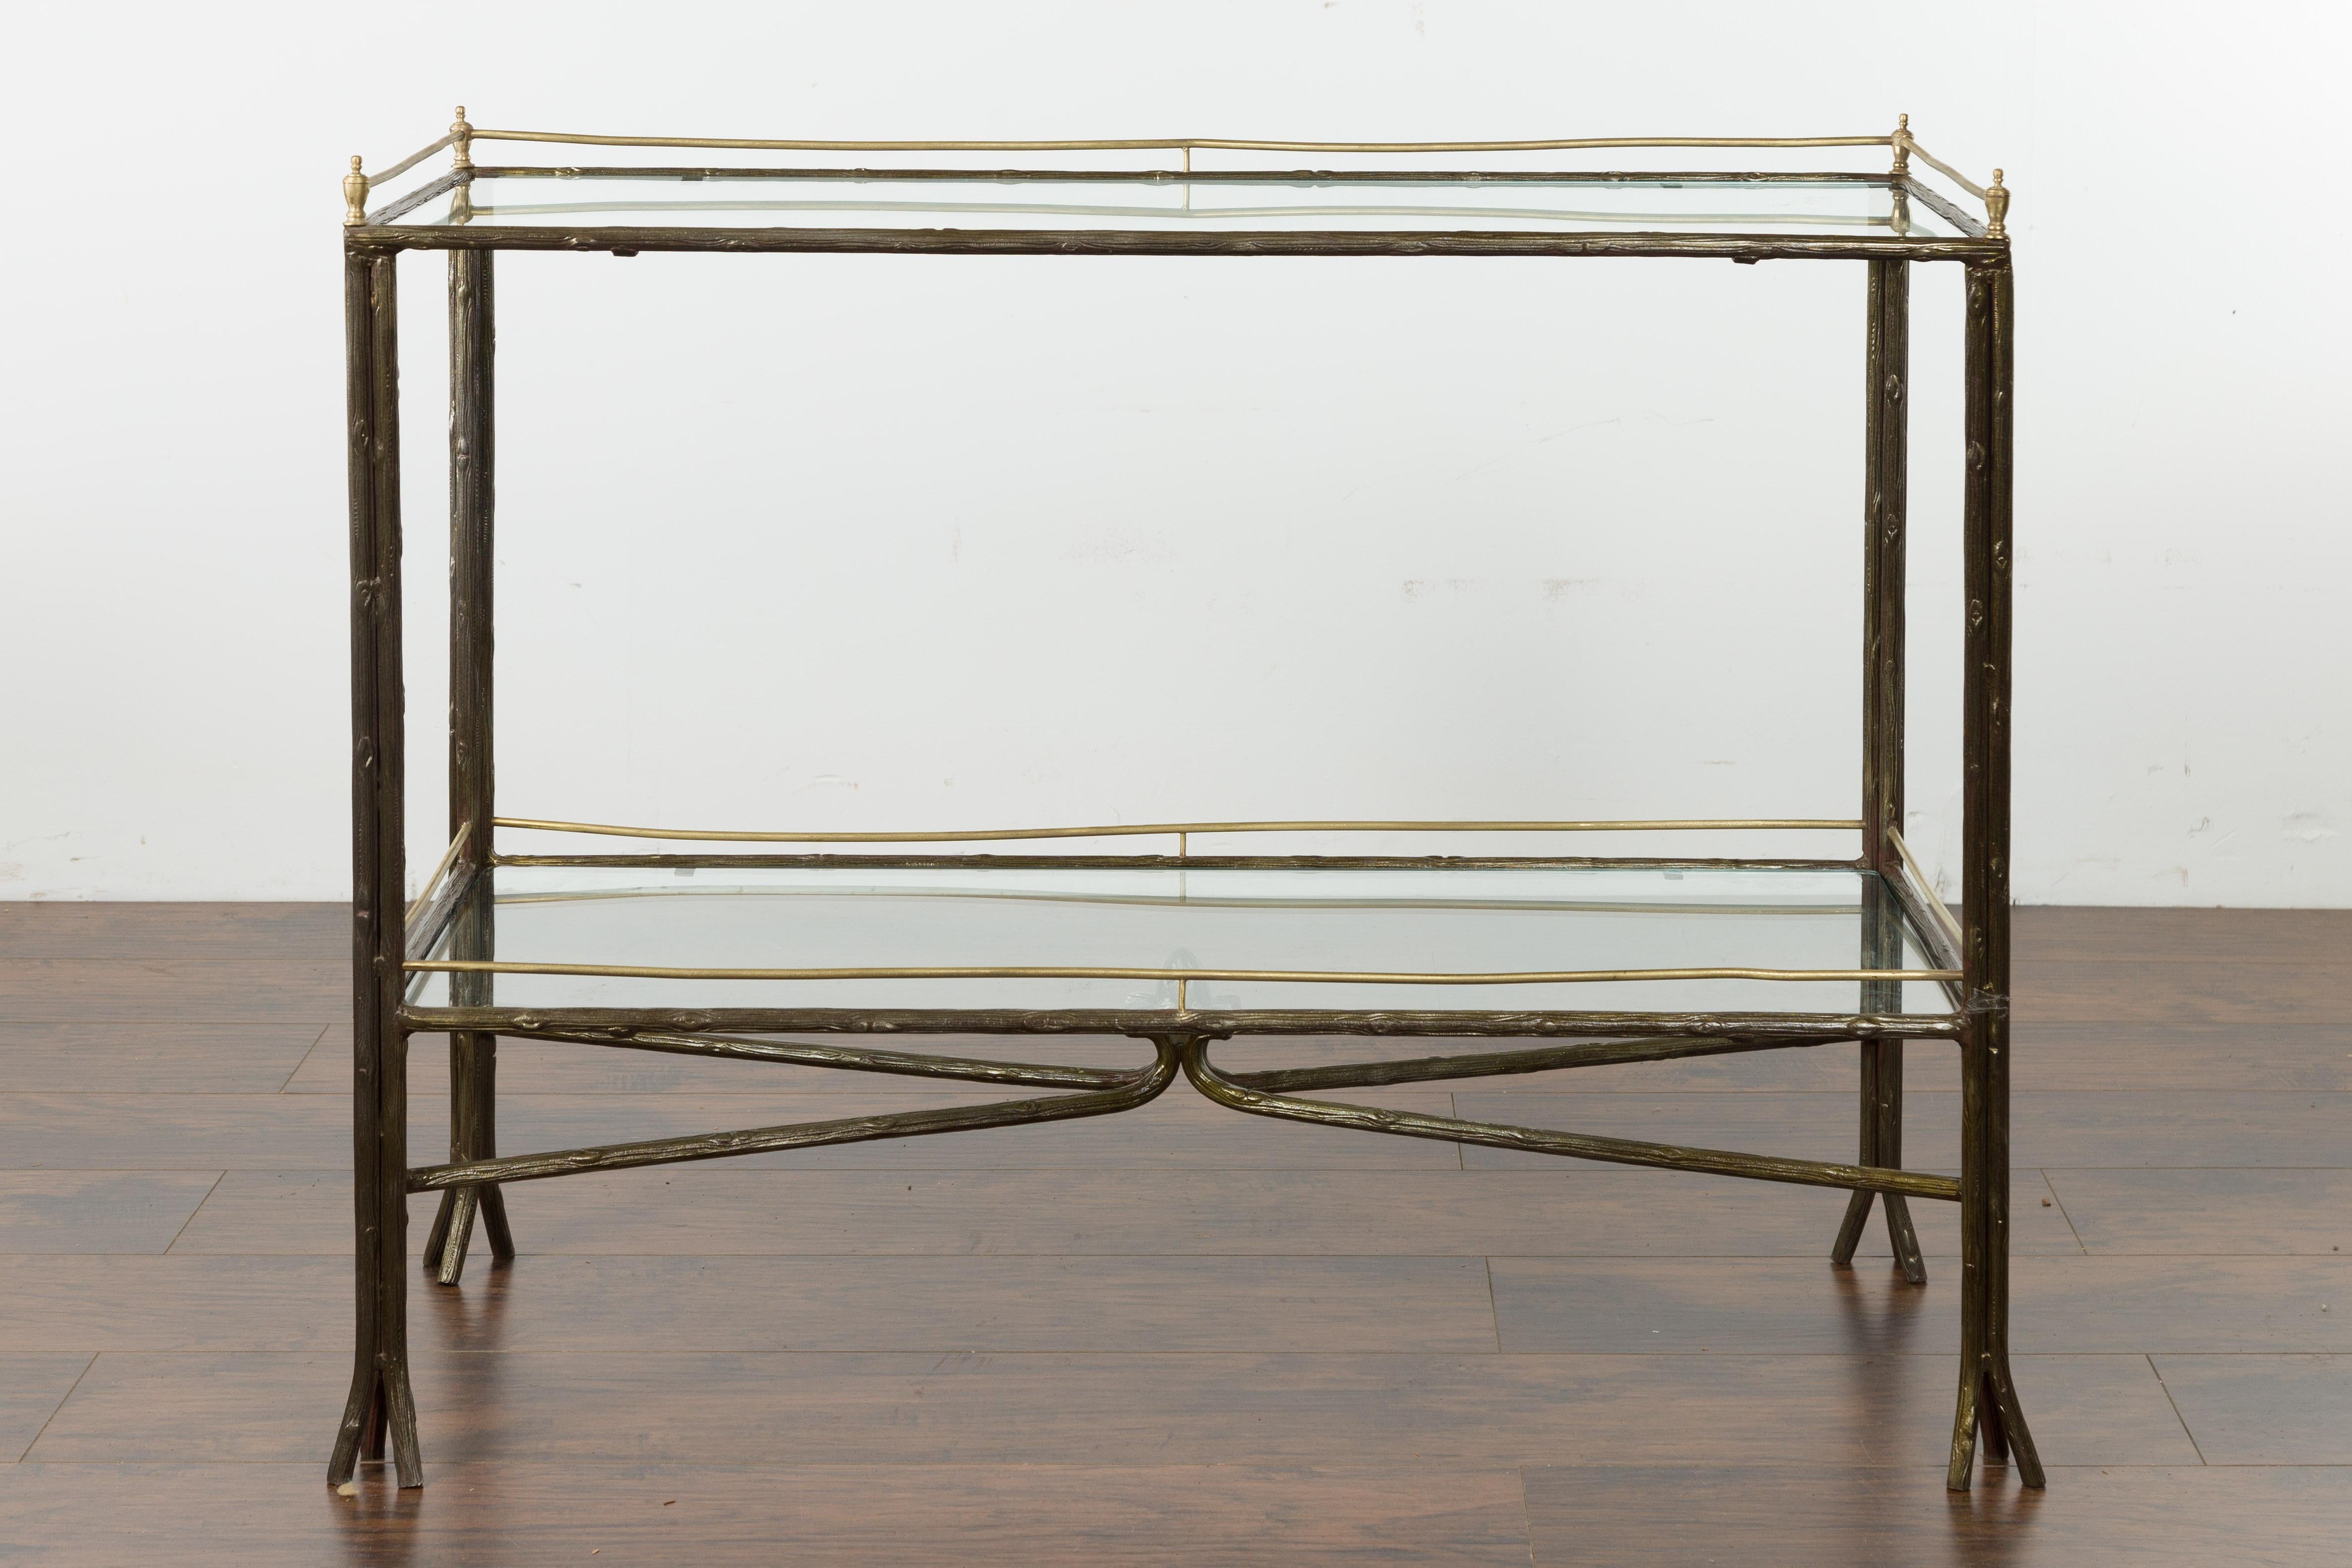 A vintage Italian steel and brass faux bois table from the mid-20th century, with glass top and shelf. Created in Italy during the midcentury period, this steel table charms us with its faux bois structure supporting a glass top and shelf. Accented